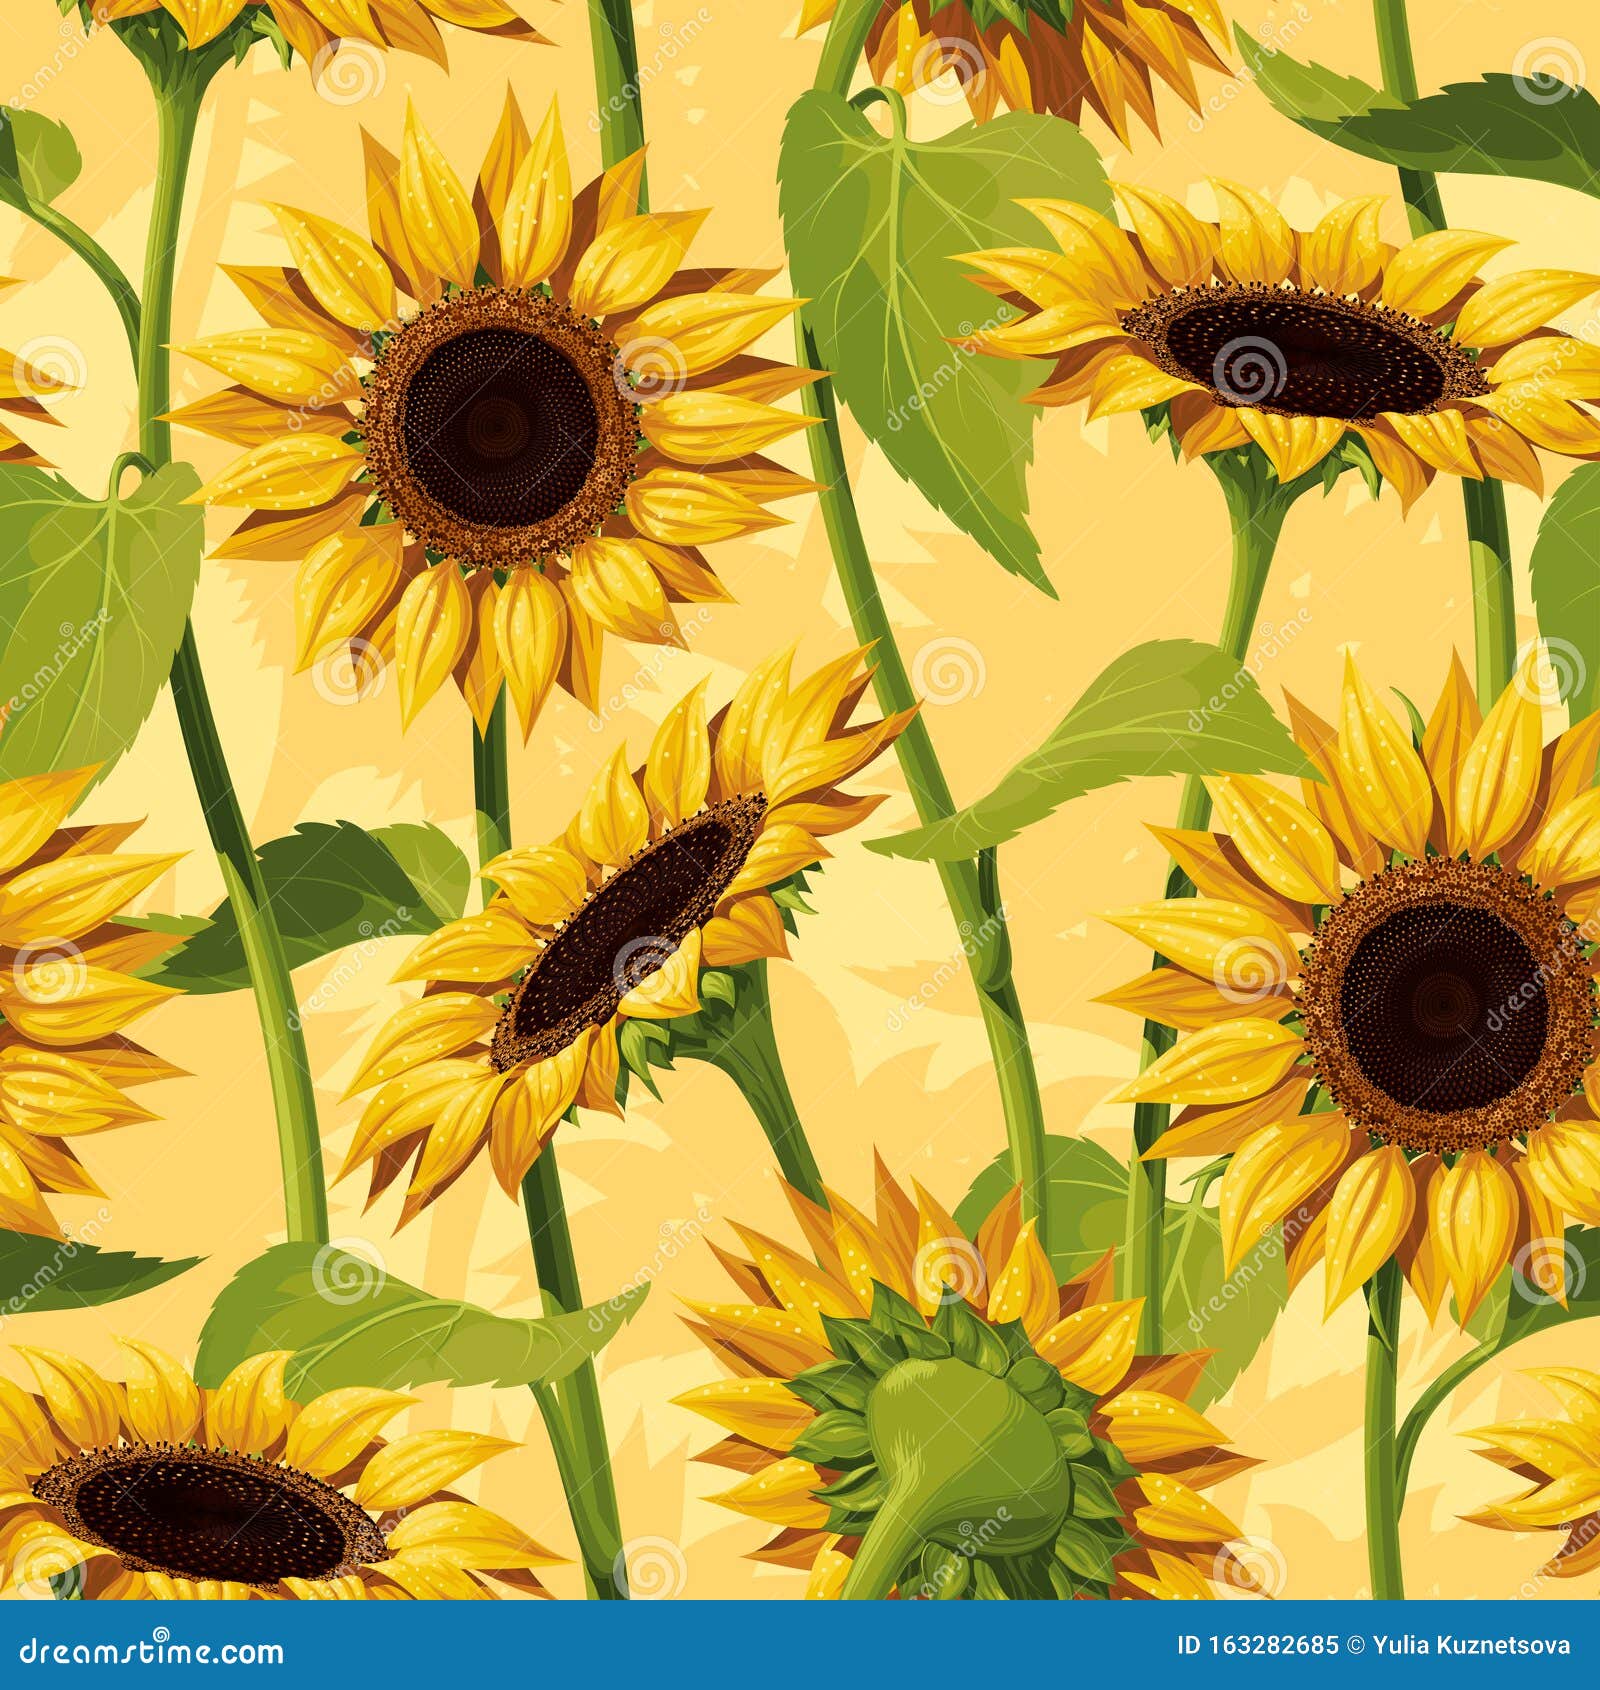 Download Seamless Vector Pattern Of Realistic Sunflower Flowers On ...